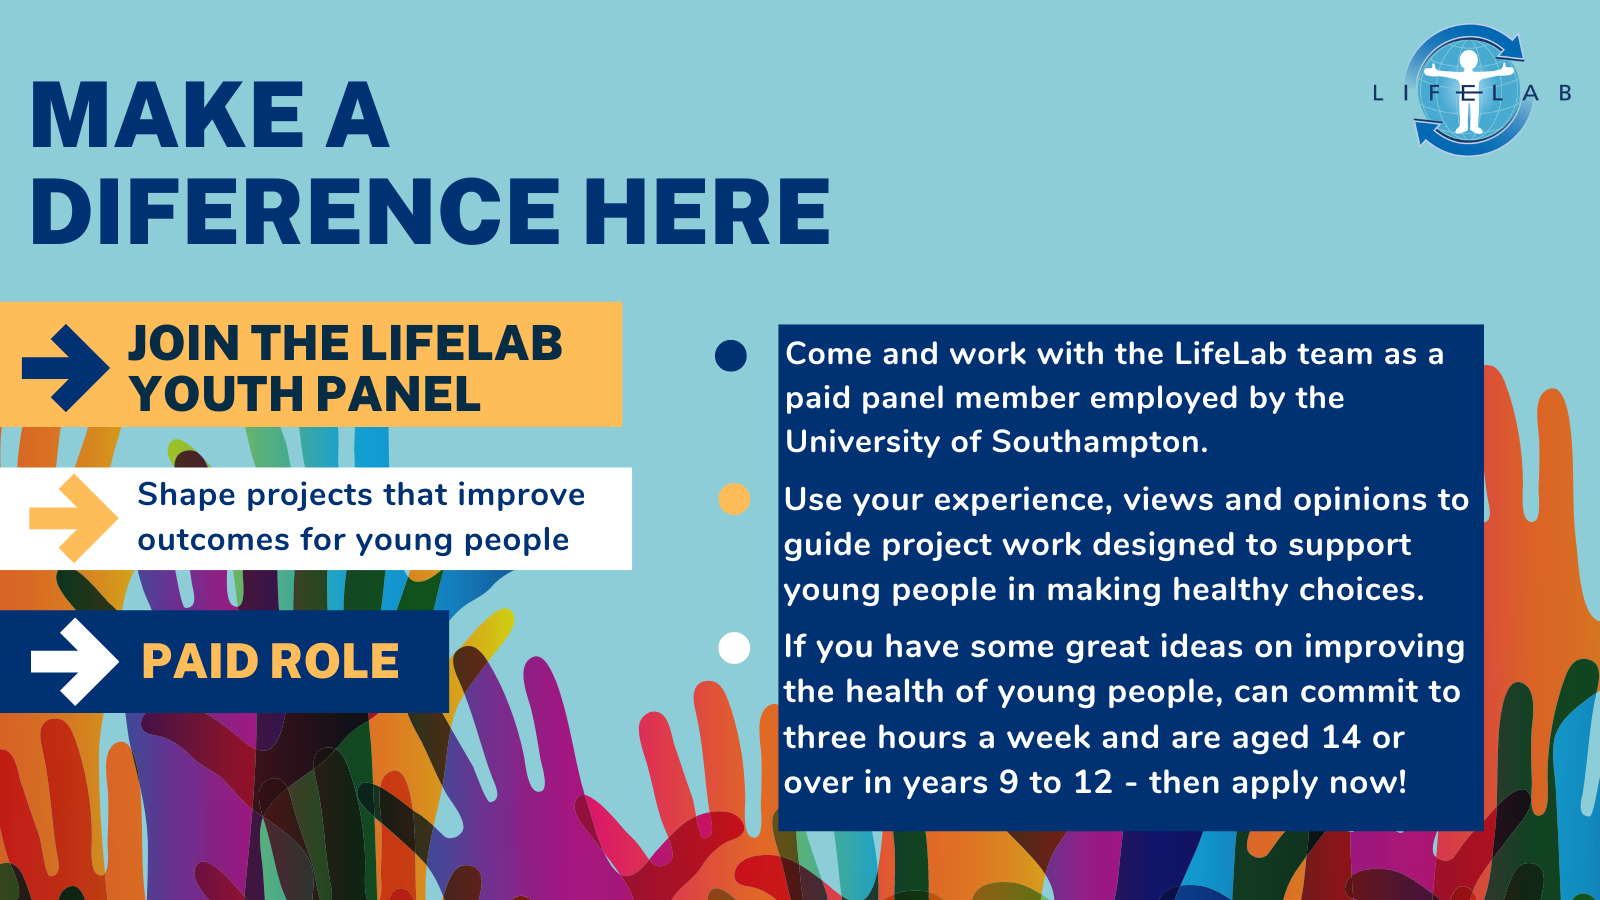 LifeLab Youth Panel - Make a difference